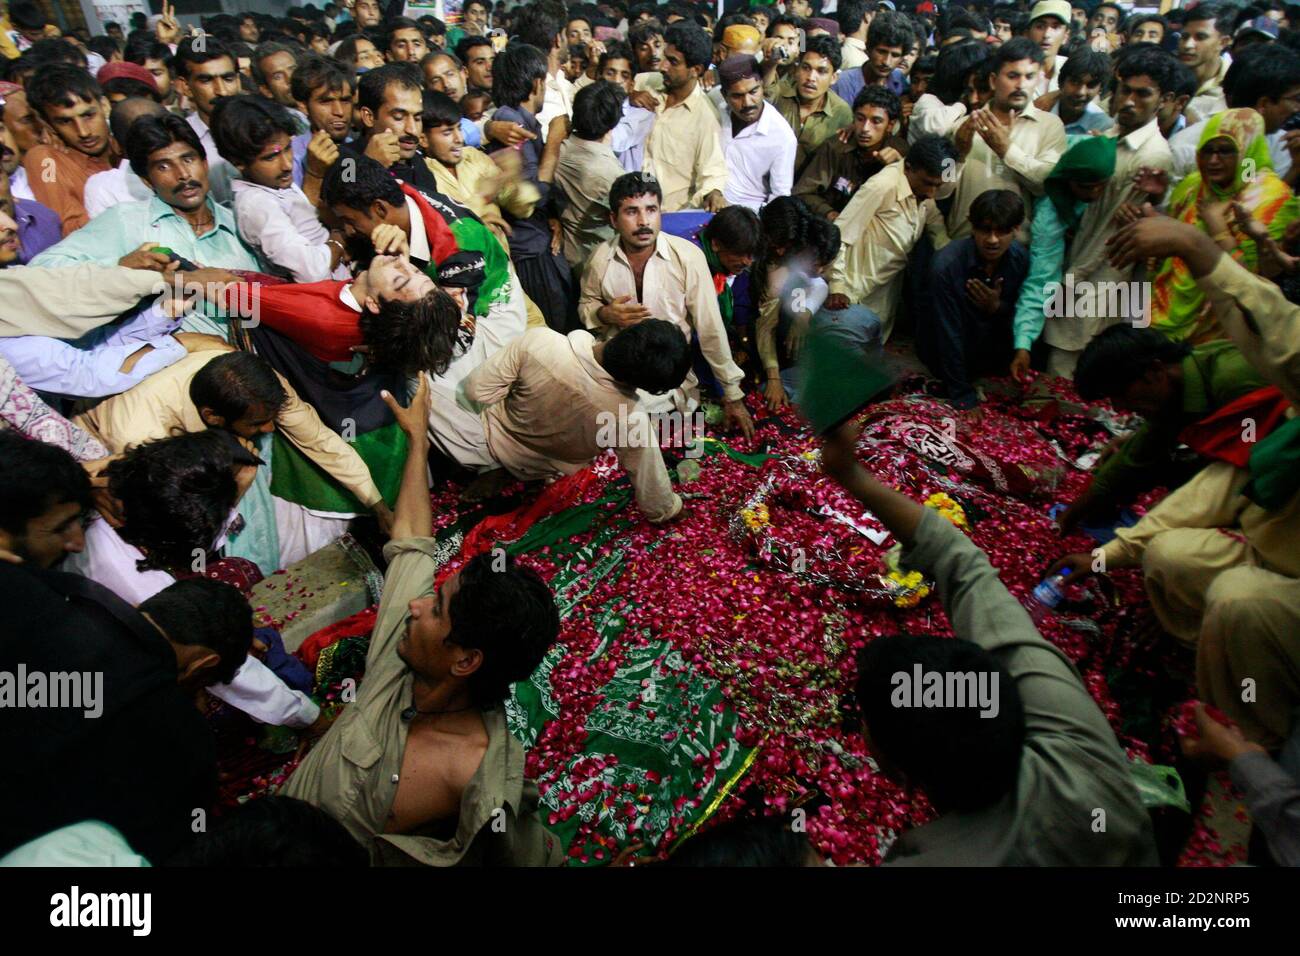 Supporters of Pakistan's slain former premier Benazir Bhutto mourn on her grave at Bhutto's family mausoleum in Garhi Khuda Bukash near Larkana April 3, 2009, on the eve of her father Zulfiqar